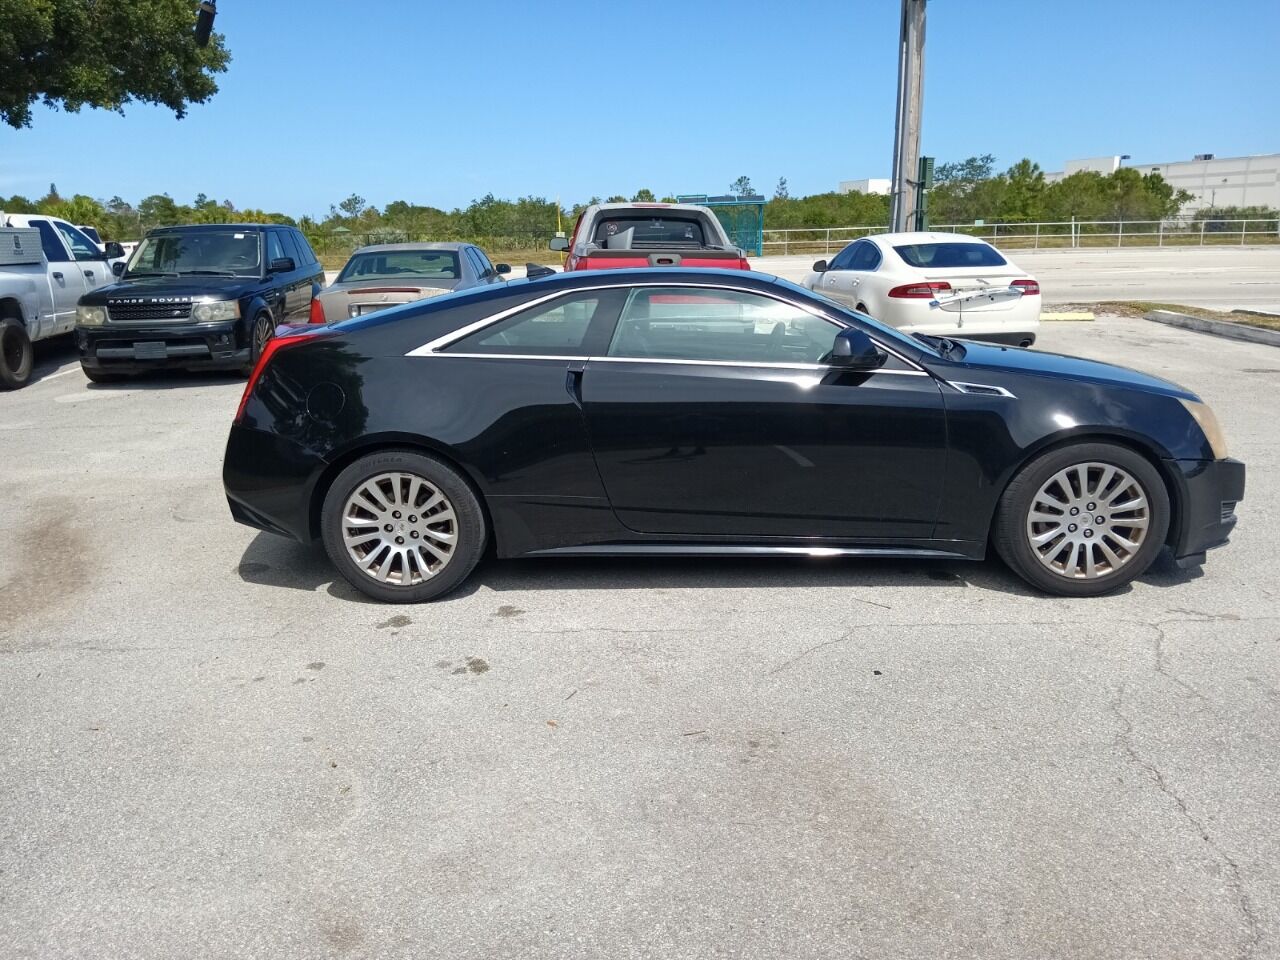 2011 Cadillac CTS Coupe - $7,950